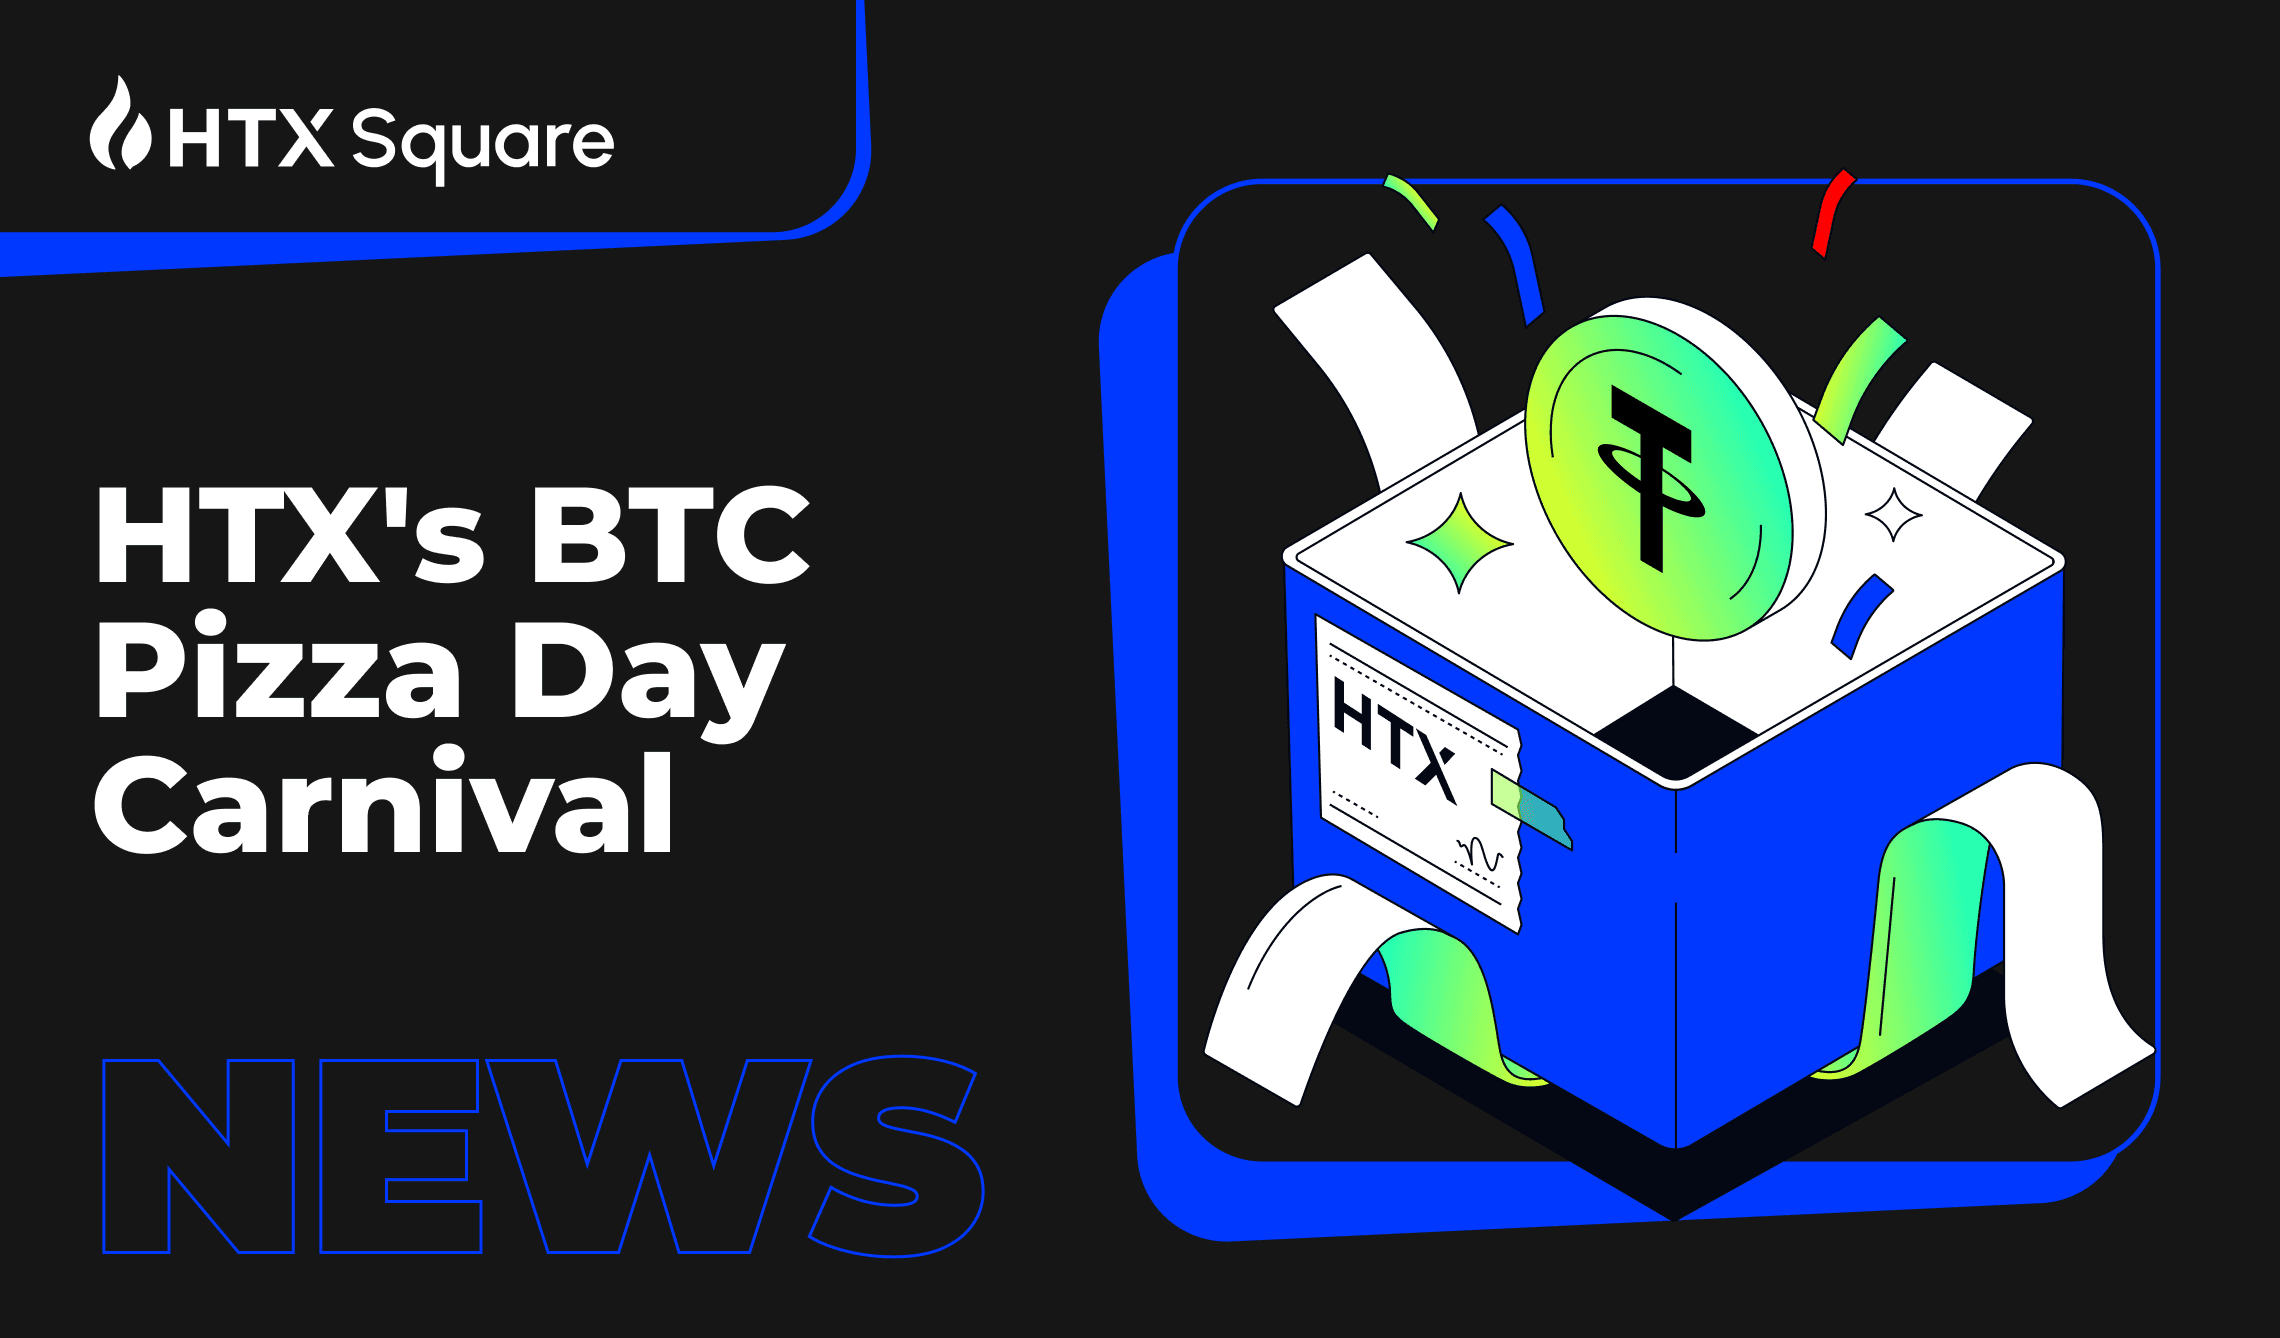 HTX’s BTC Pizza Day Carnival: 10,000 Pizza Coupons and 1 Million USDT Up for Grabs